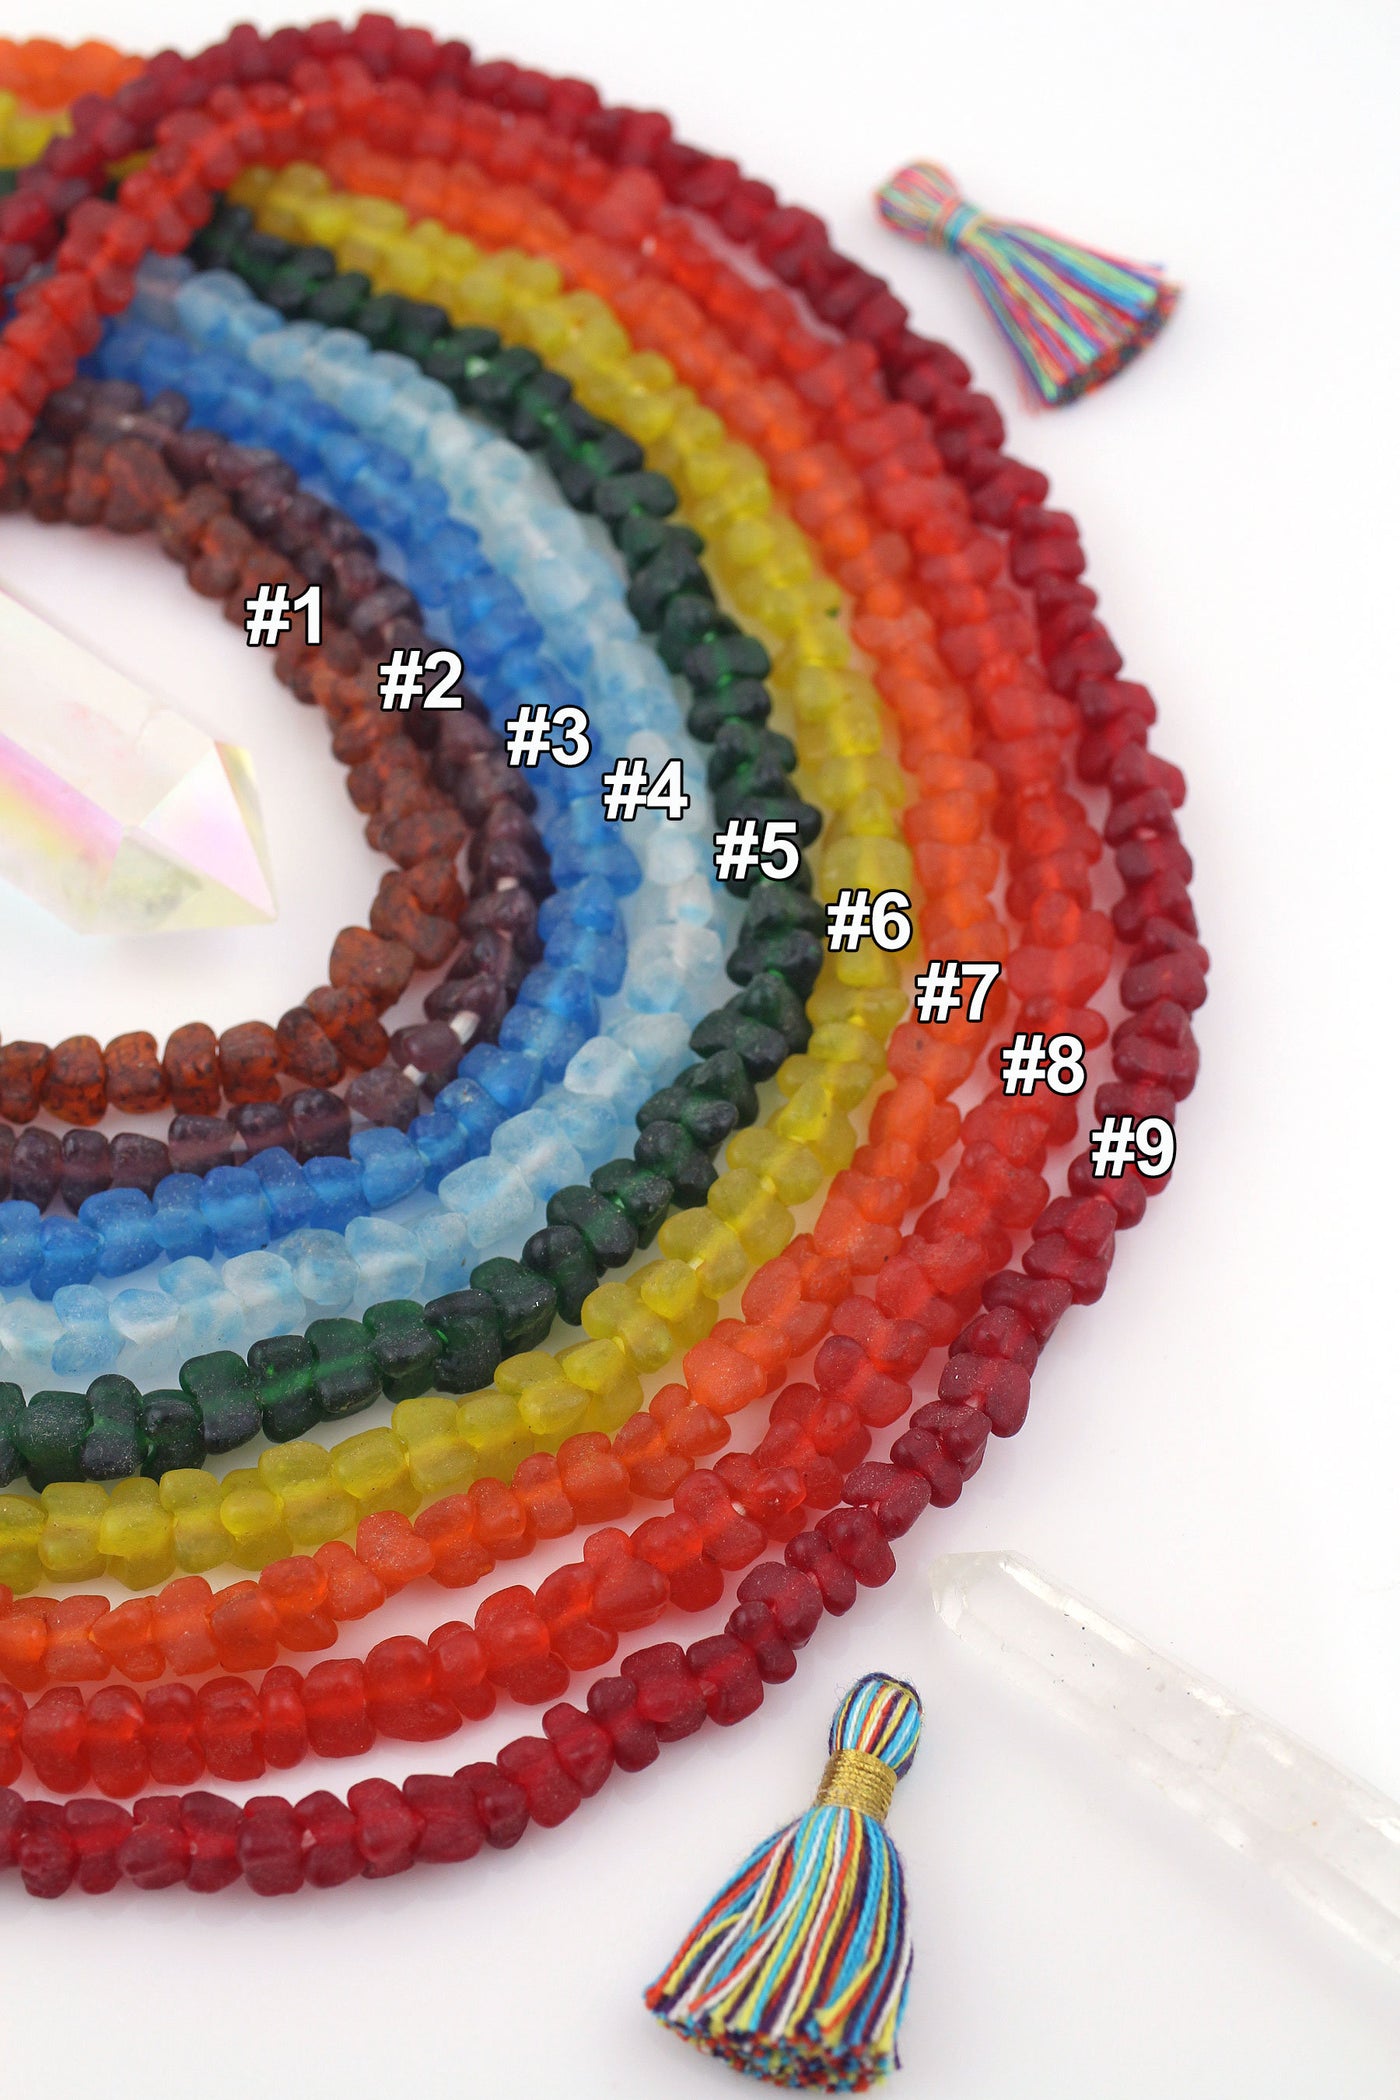 African Triangle: Geometric Recycled Ghana Glass Beads, 8-9mm, Assorted ROYGBV Jewelry Supplies